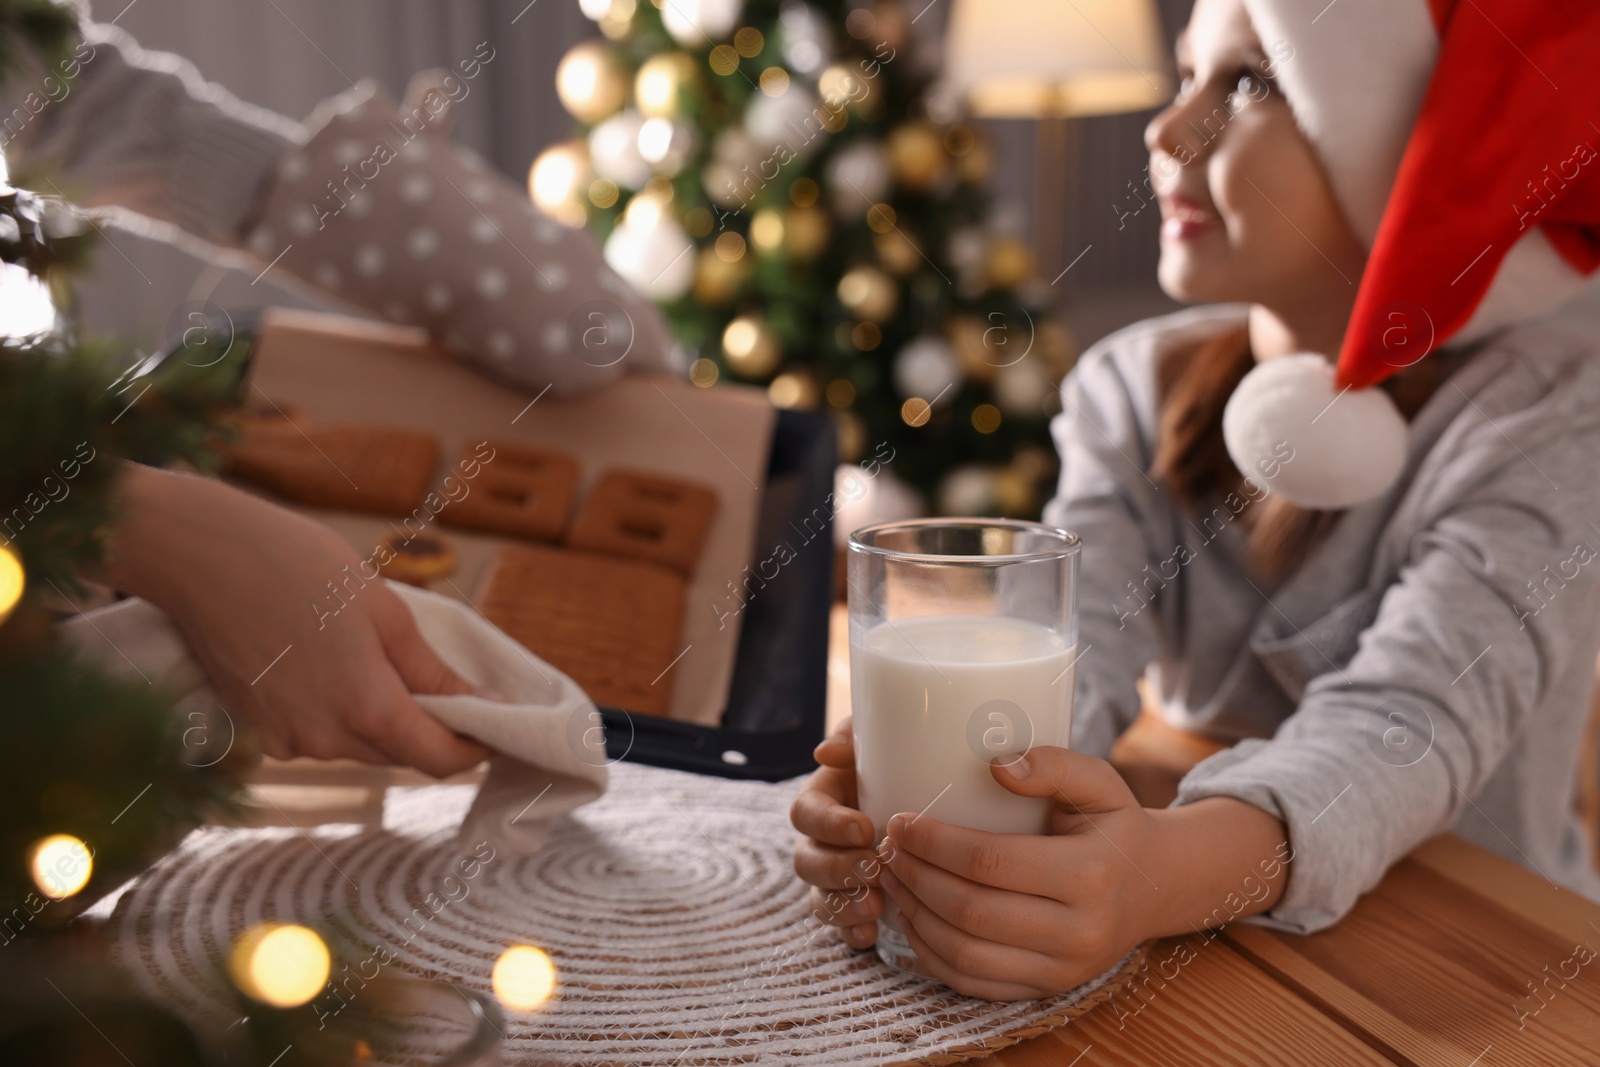 Photo of Mother showing her daughter baked Christmas pastry at wooden table, focus on glass of milk